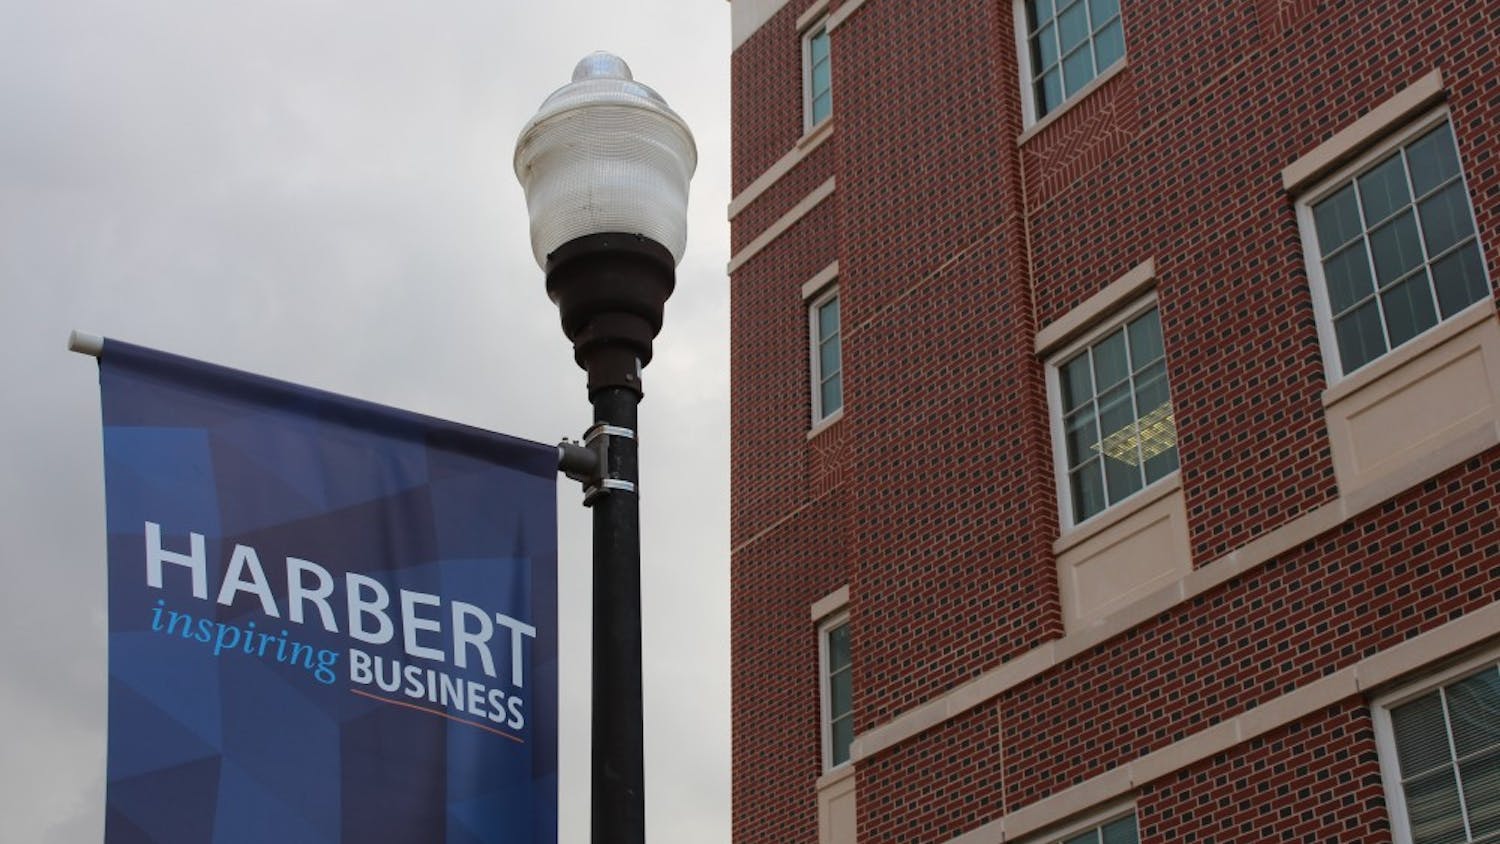 The Harbert College of Business is located in Lowder Hall,&nbsp;taken on Saturday, Feb 24, 2018 in Auburn, Ala.